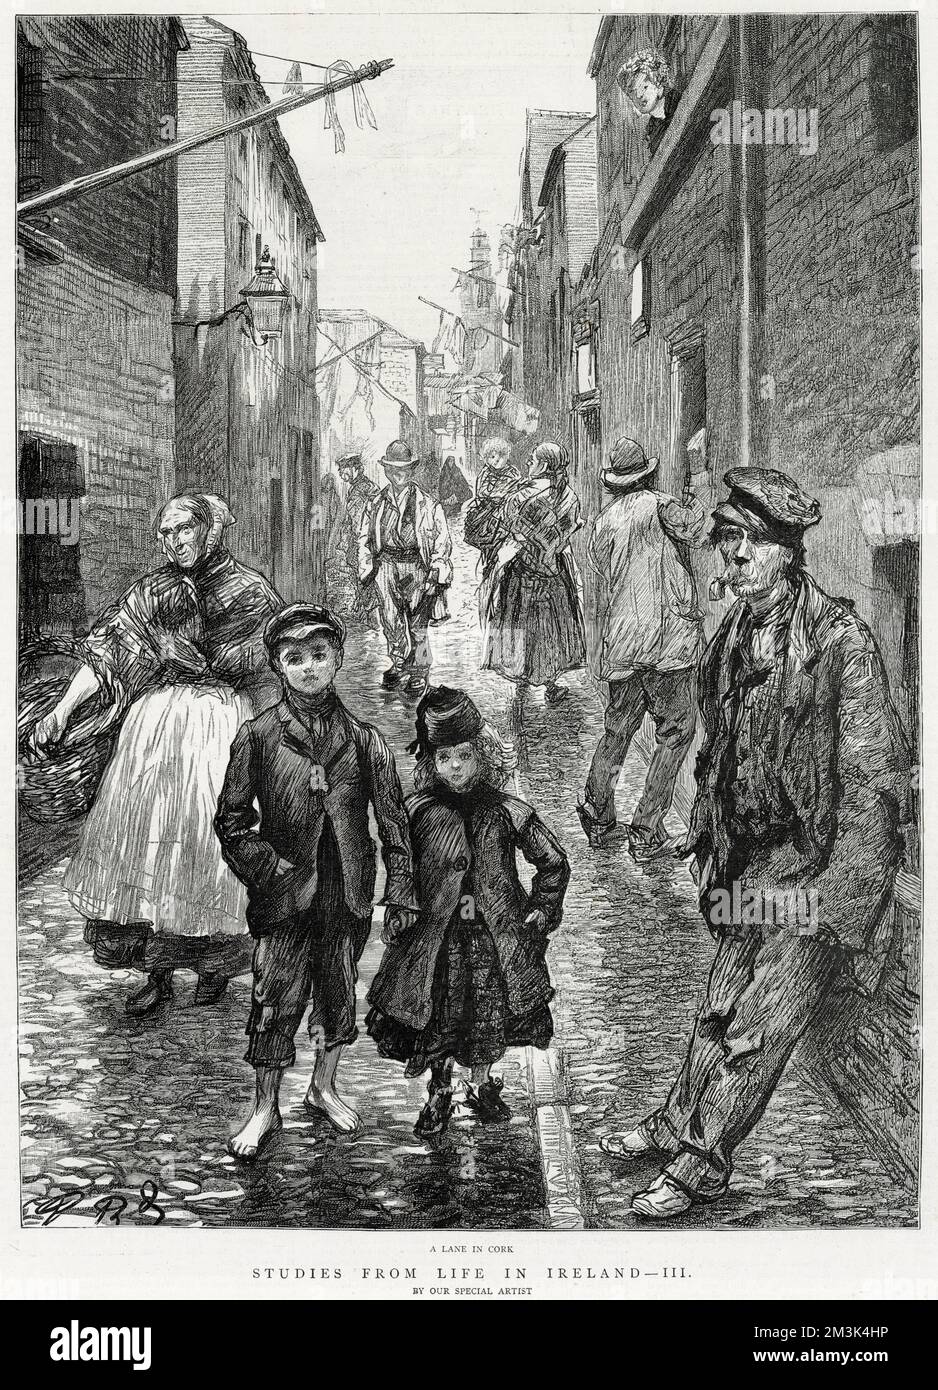 This is a general scene of street life in a lane in Cork, Ireland. In this poor neighbourhood men, women and children walk up and down the lane, washing hangs from one building and someone looks out of a window. Stock Photo